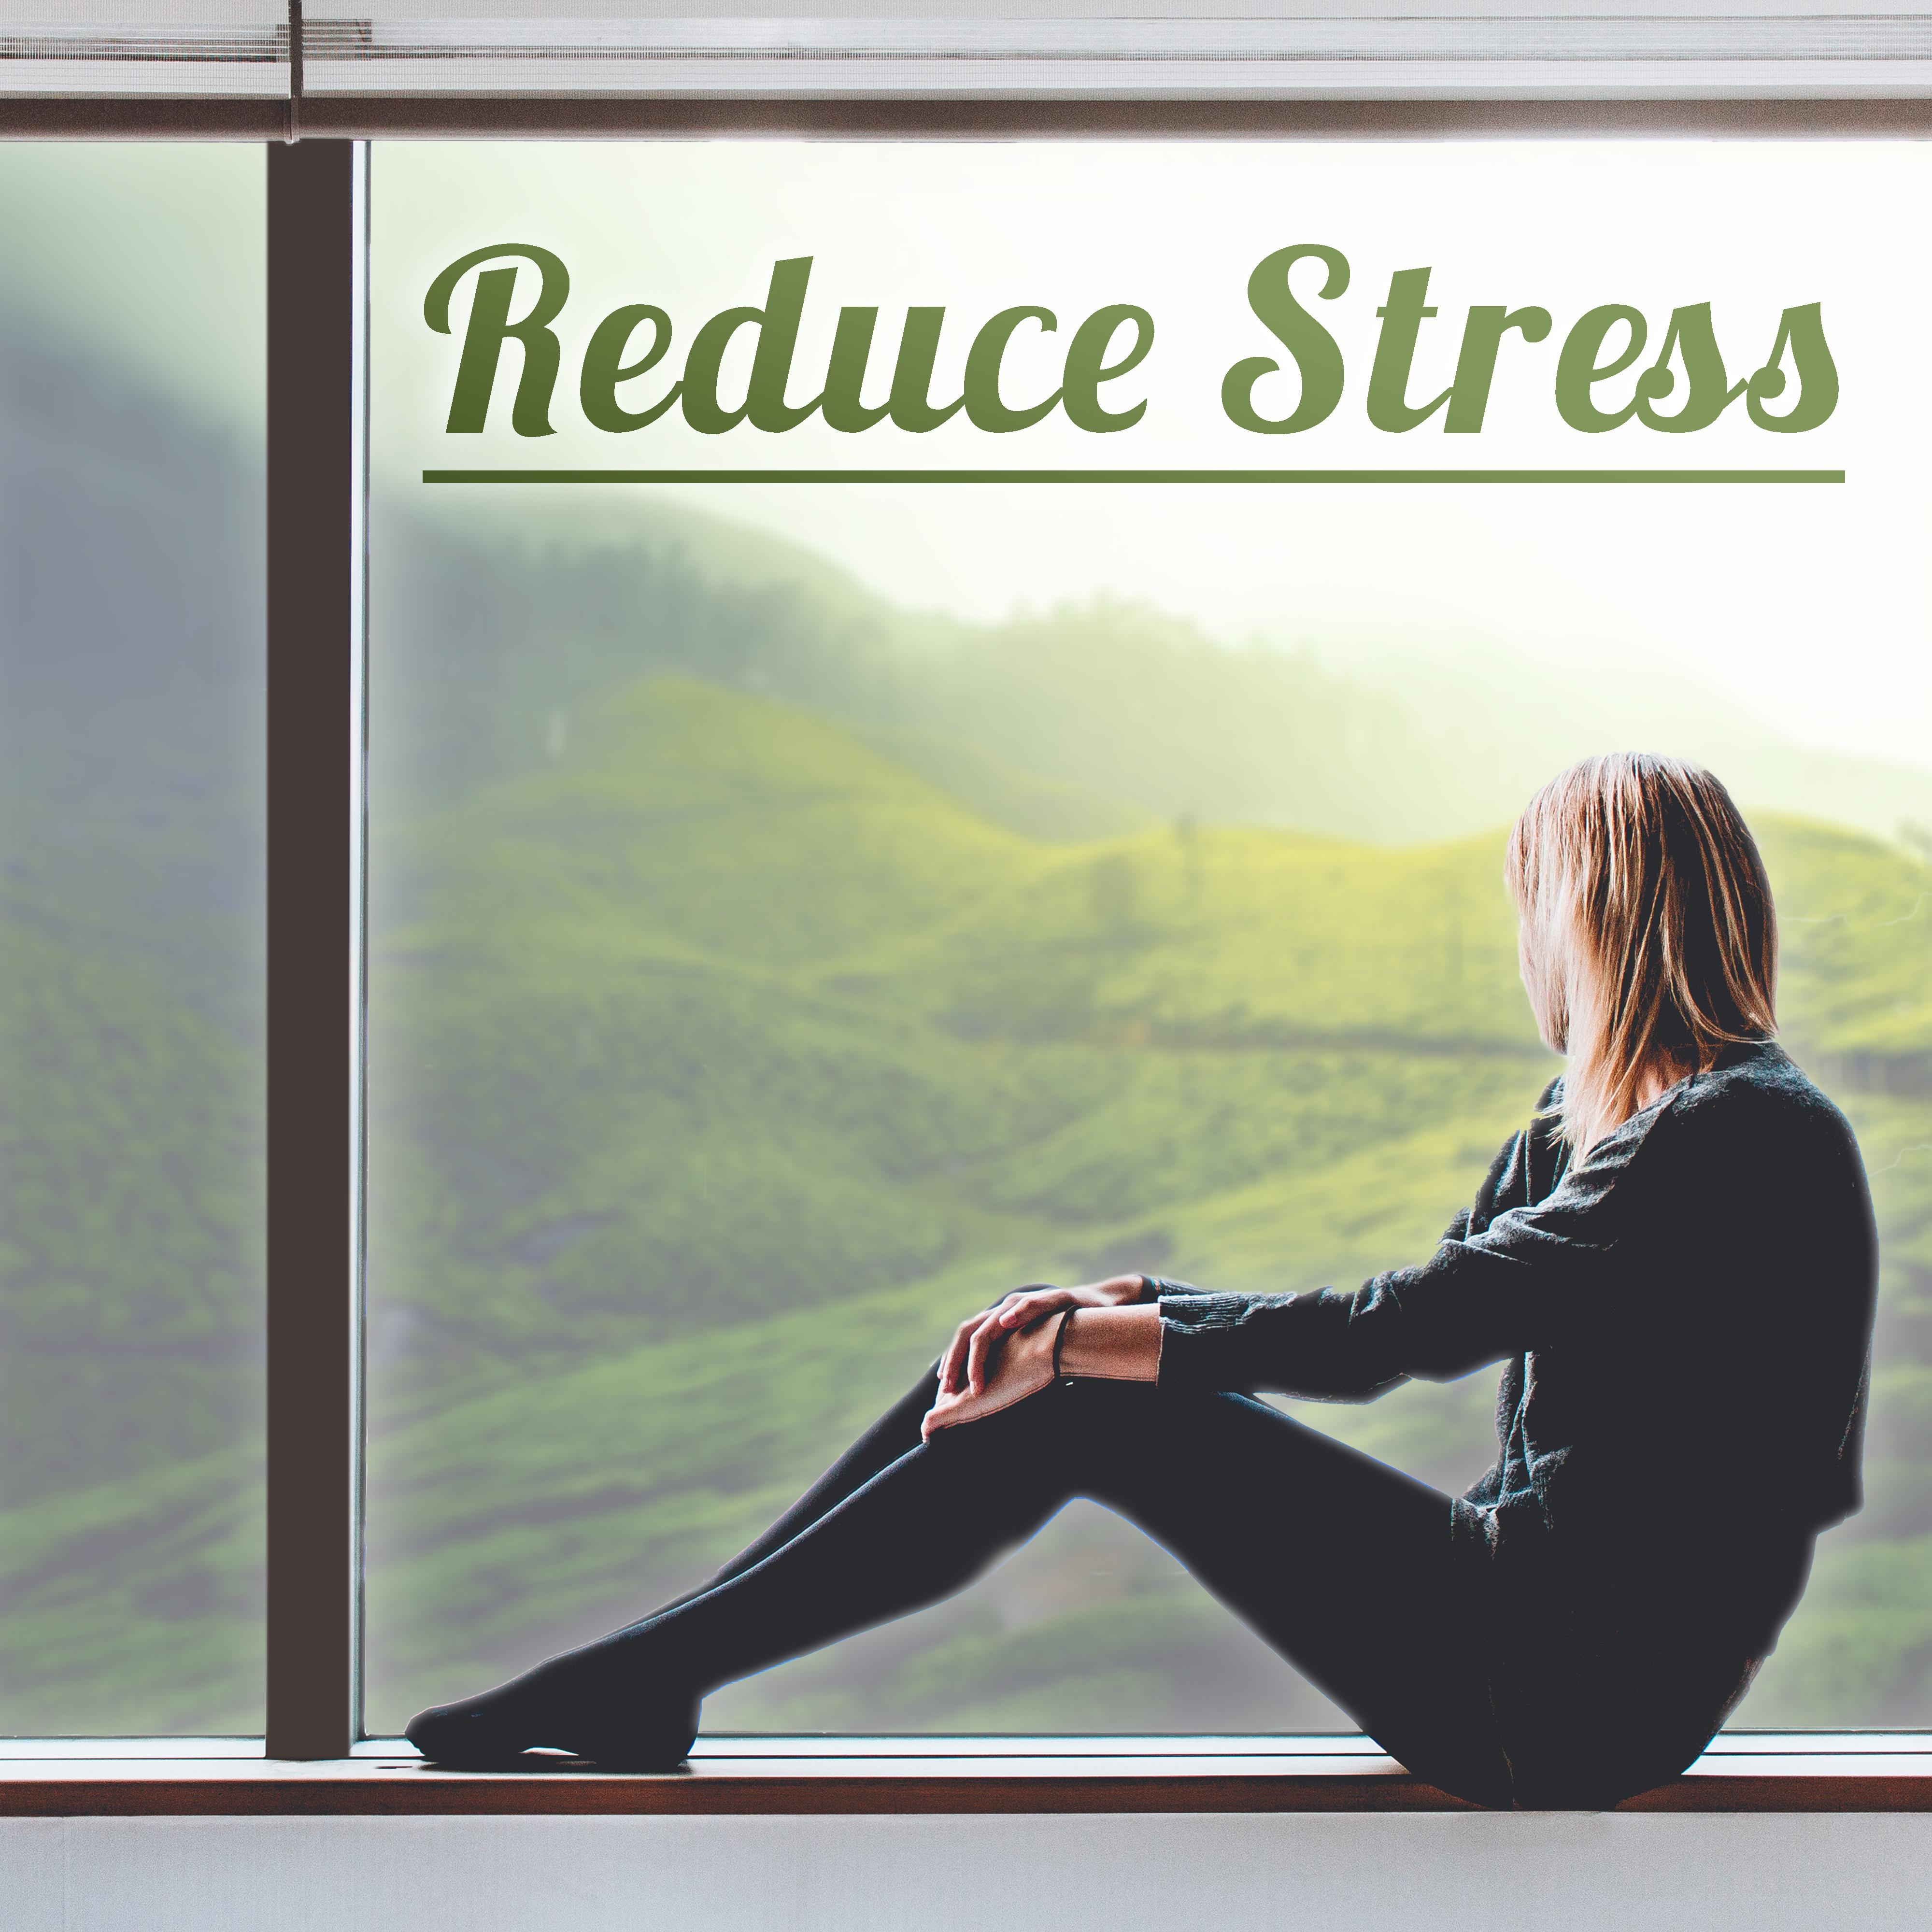 Reduce Stress – Healing Nature Sounds, Calm Down & Relax, Relaxed Body & Mind, Rest